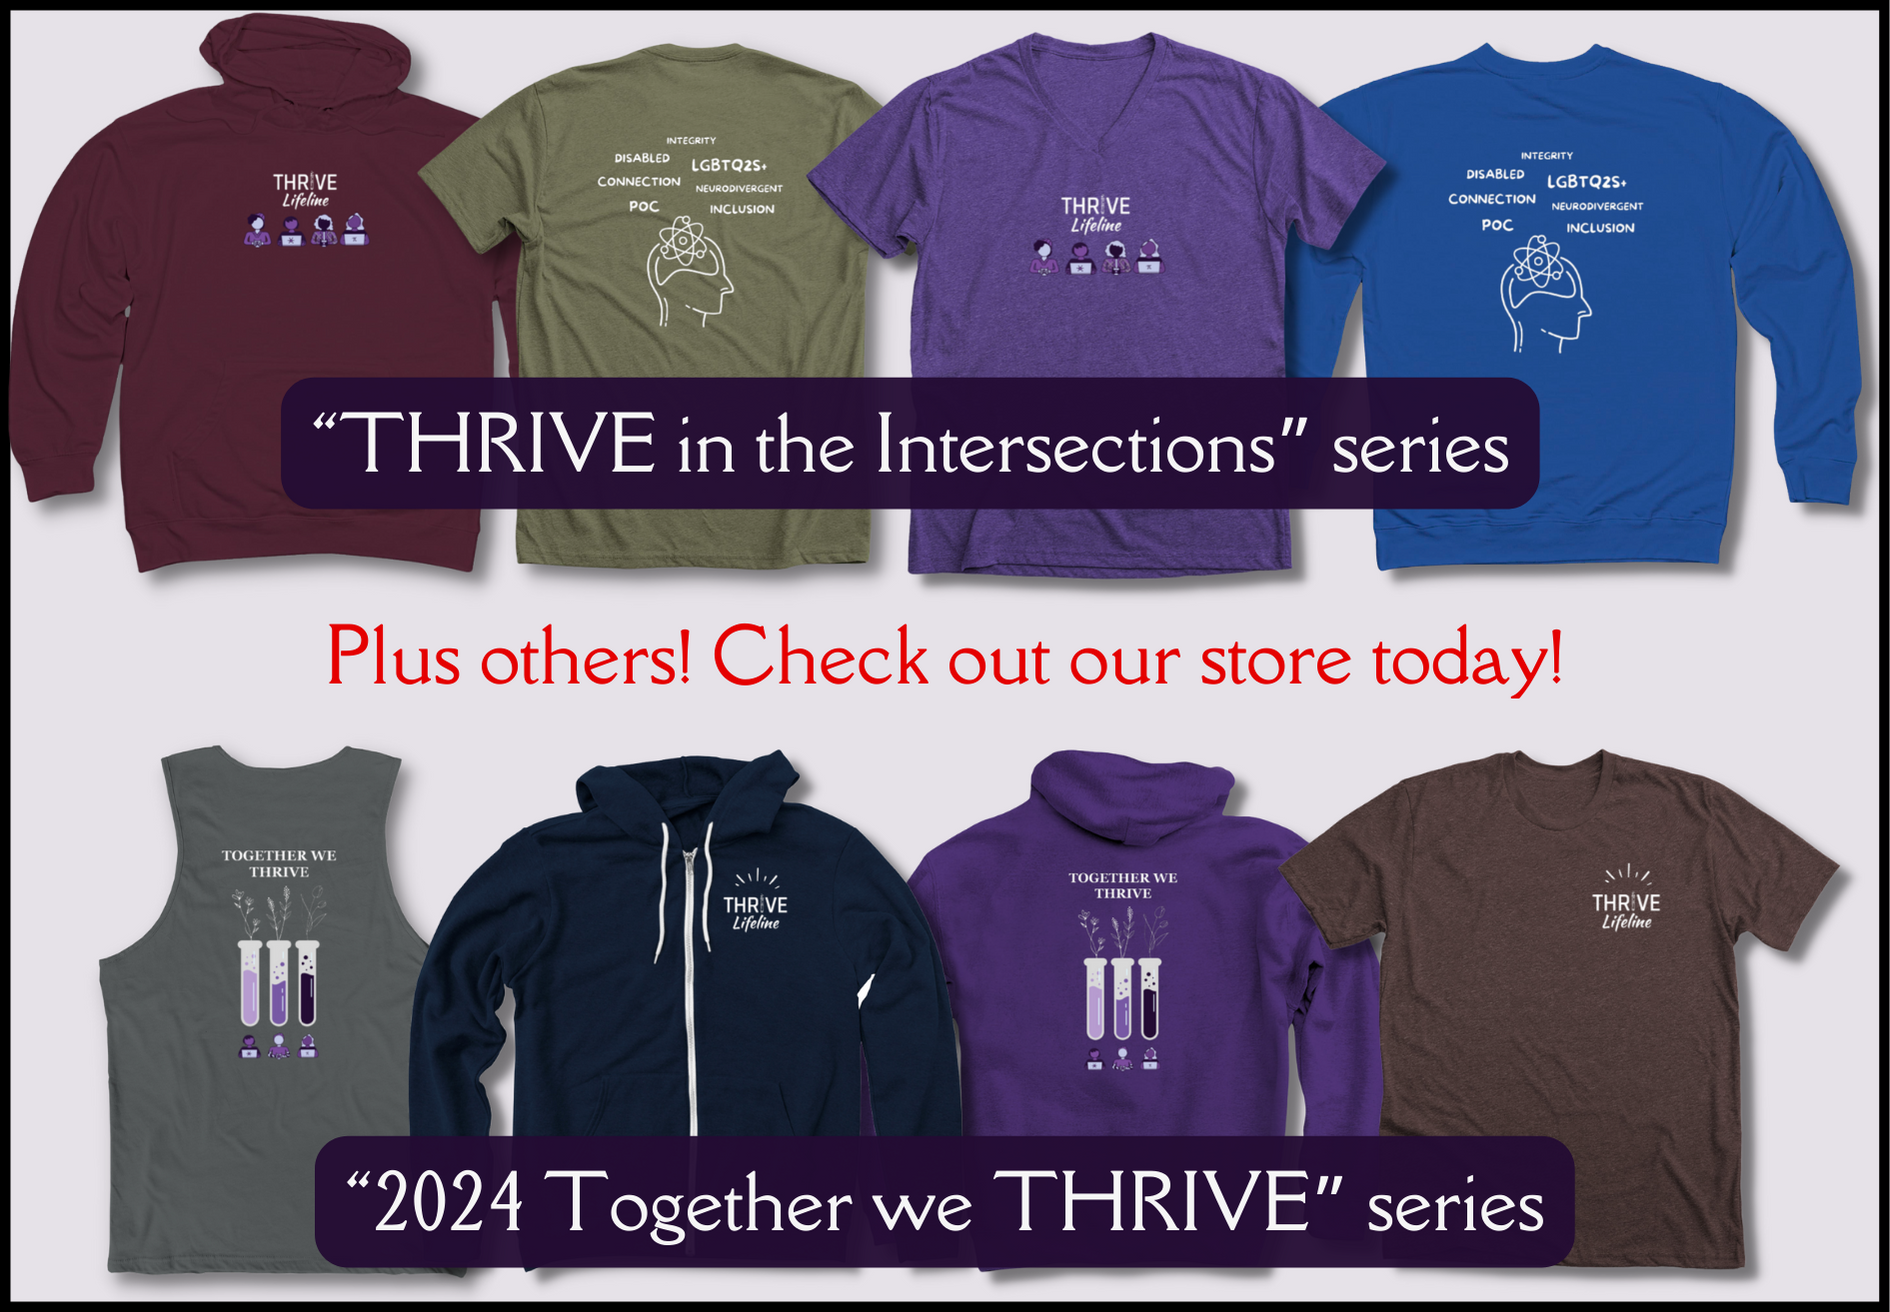 Two rows of screenshots of shirts. The top has a front design with the THRIVE logo and a back design of a brain and various diversity and identity words around it. Text overlaying the shirts says THRIVE in the intersections series. In the middle it says Plus others! Check out our store today! And below is another row of shirts. The front design is the THRIVE logo, and the back design is 3 test tubes with plants and purple people with the words together we thrive above